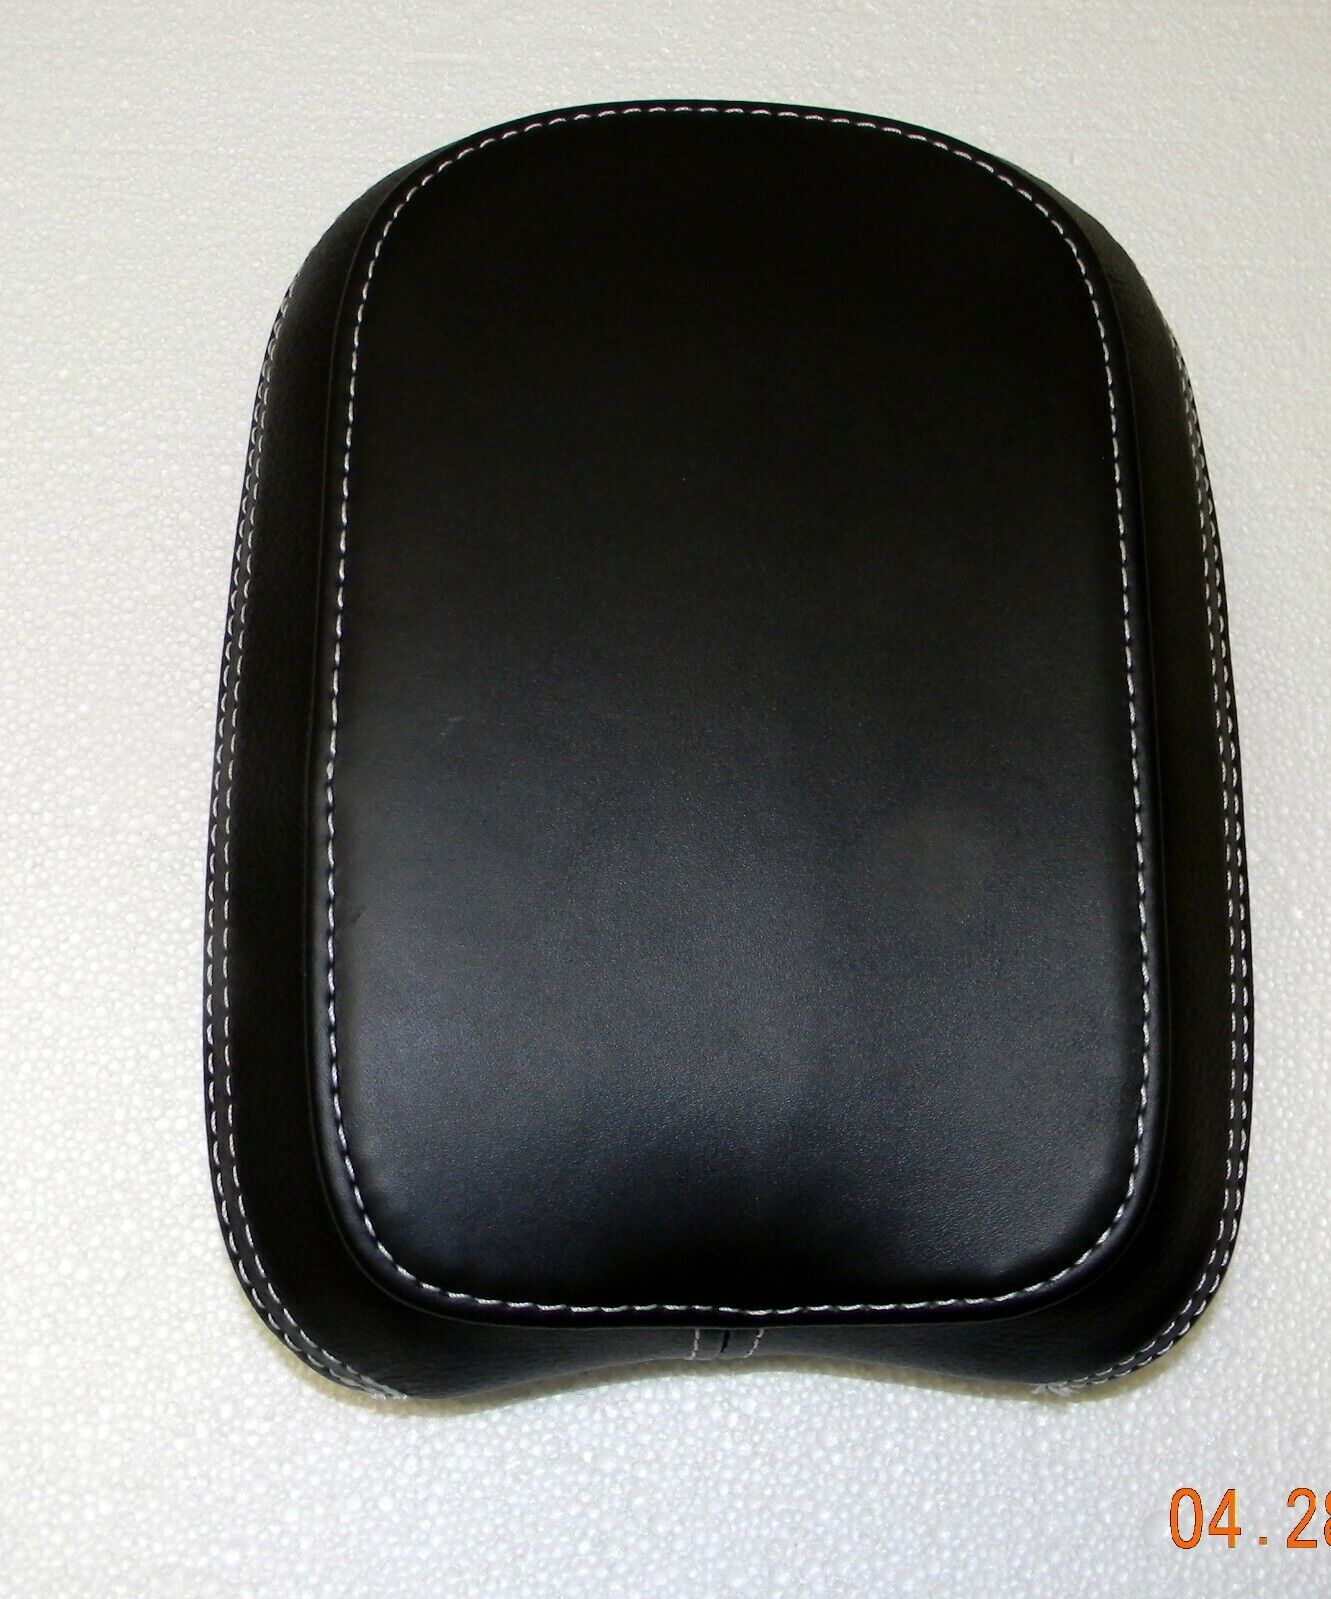 New - Indian 2009 to 2013 Passenger Seat Backrest, Sissy Bar Pad, Black Leather